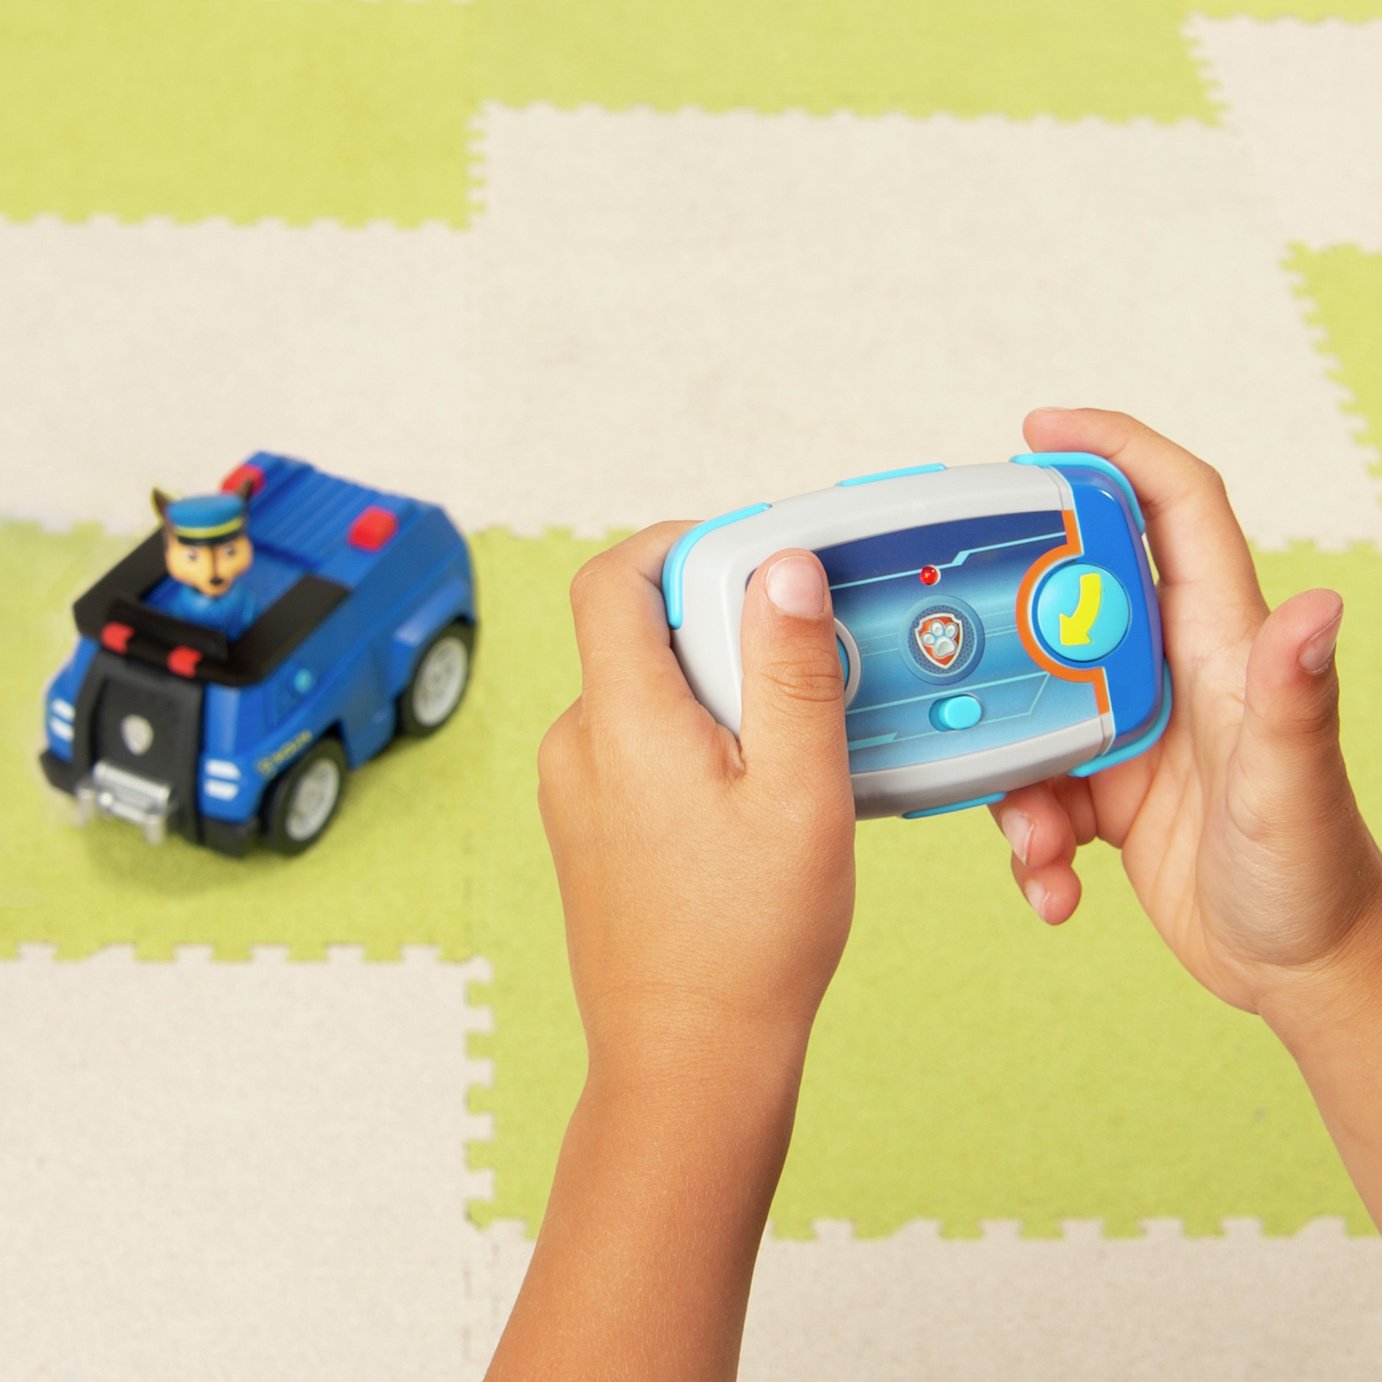 PAW Patrol Radio Control Chase Review